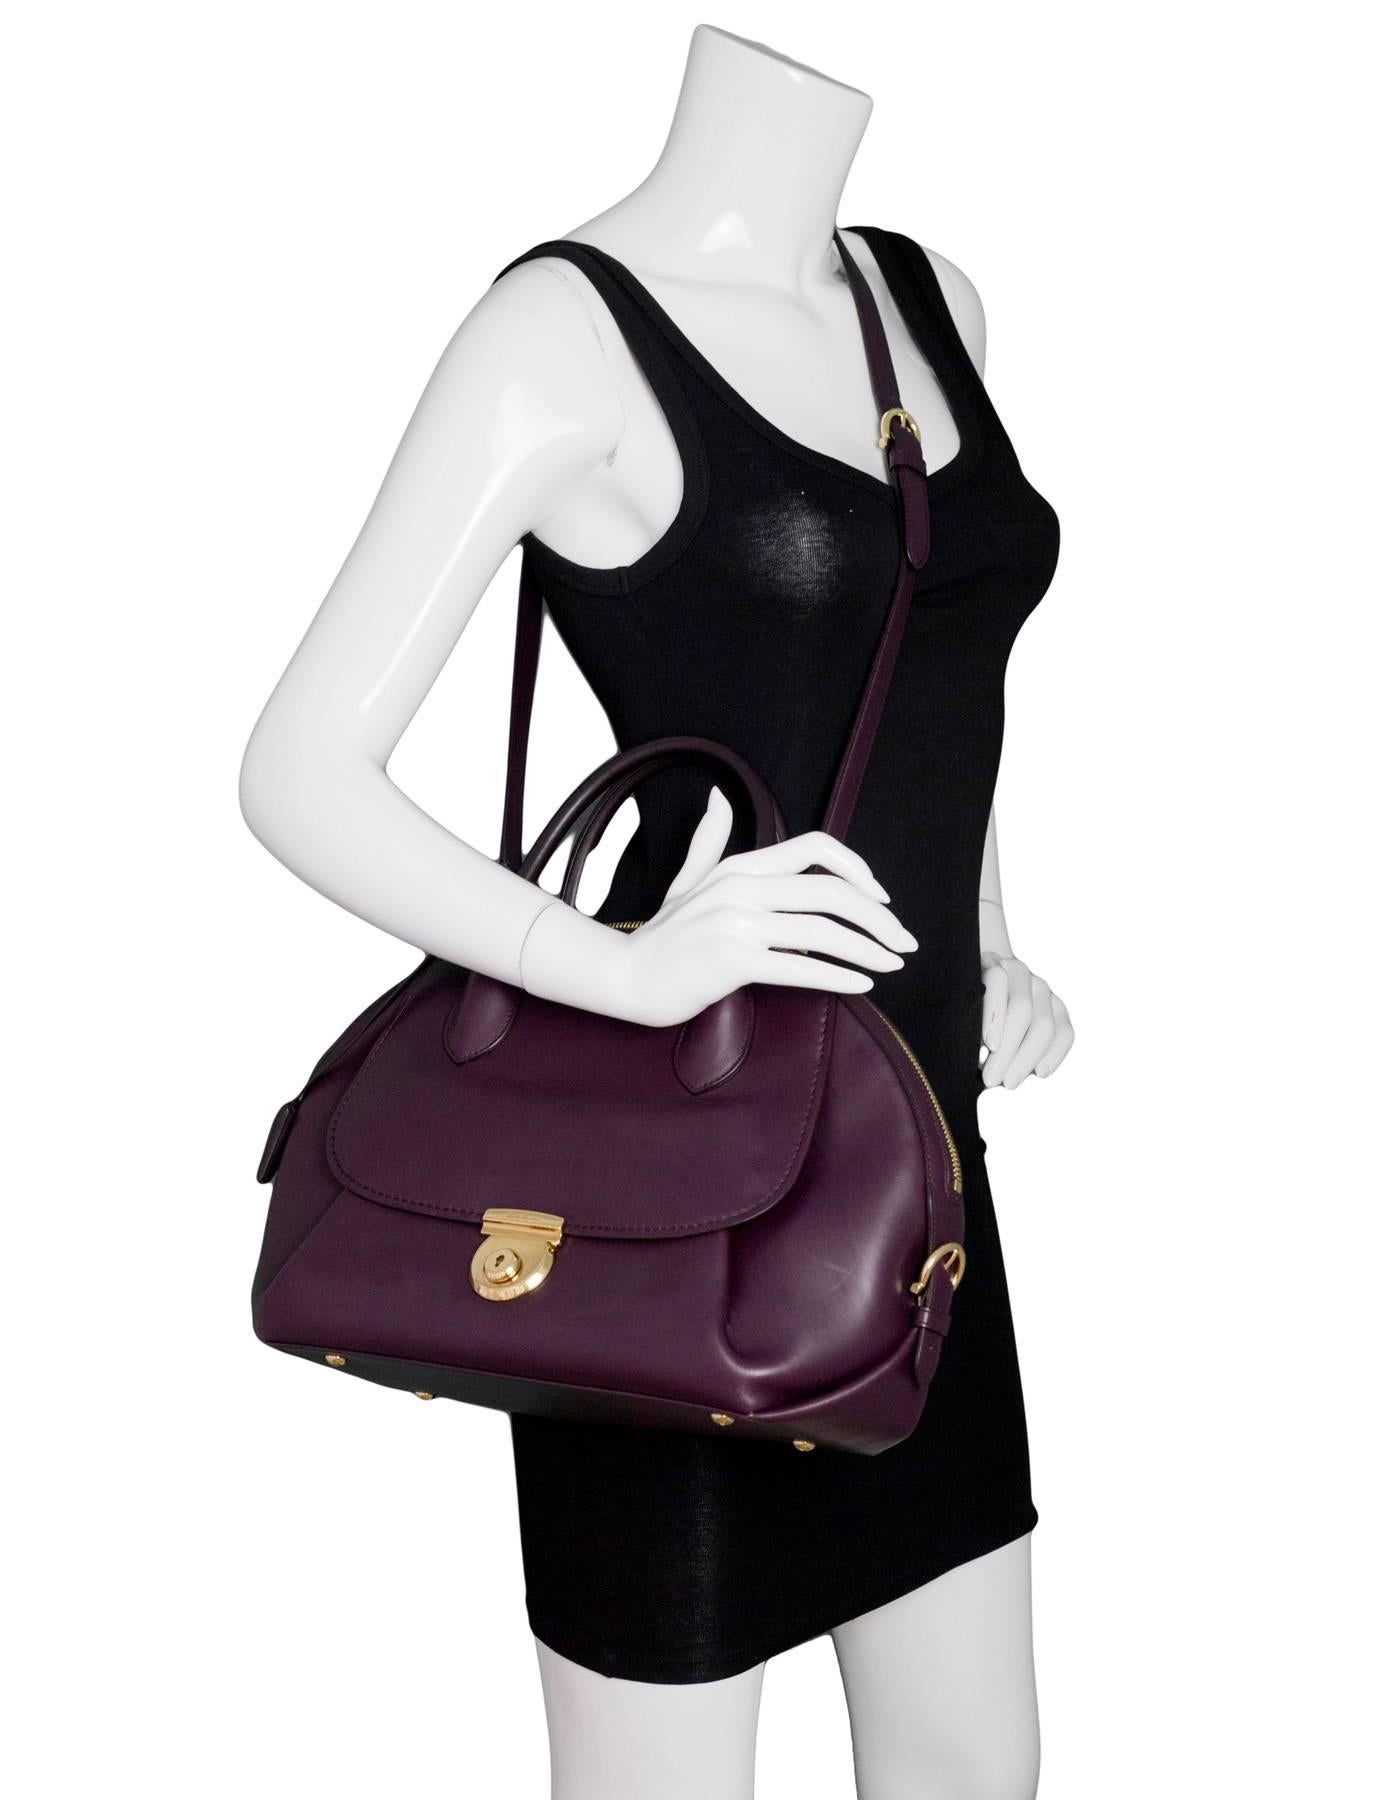 Salvatore Ferragamo Plum Leather Medium Fiamma Bowler Bag
Features optional shoulder strap

Made In: Italy
Color: Plum purple
Hardware: Goldtone
Materials: Leather, metal
Lining: Plum textile
Closure/Opening: Double zip top
Exterior Pockets: Front